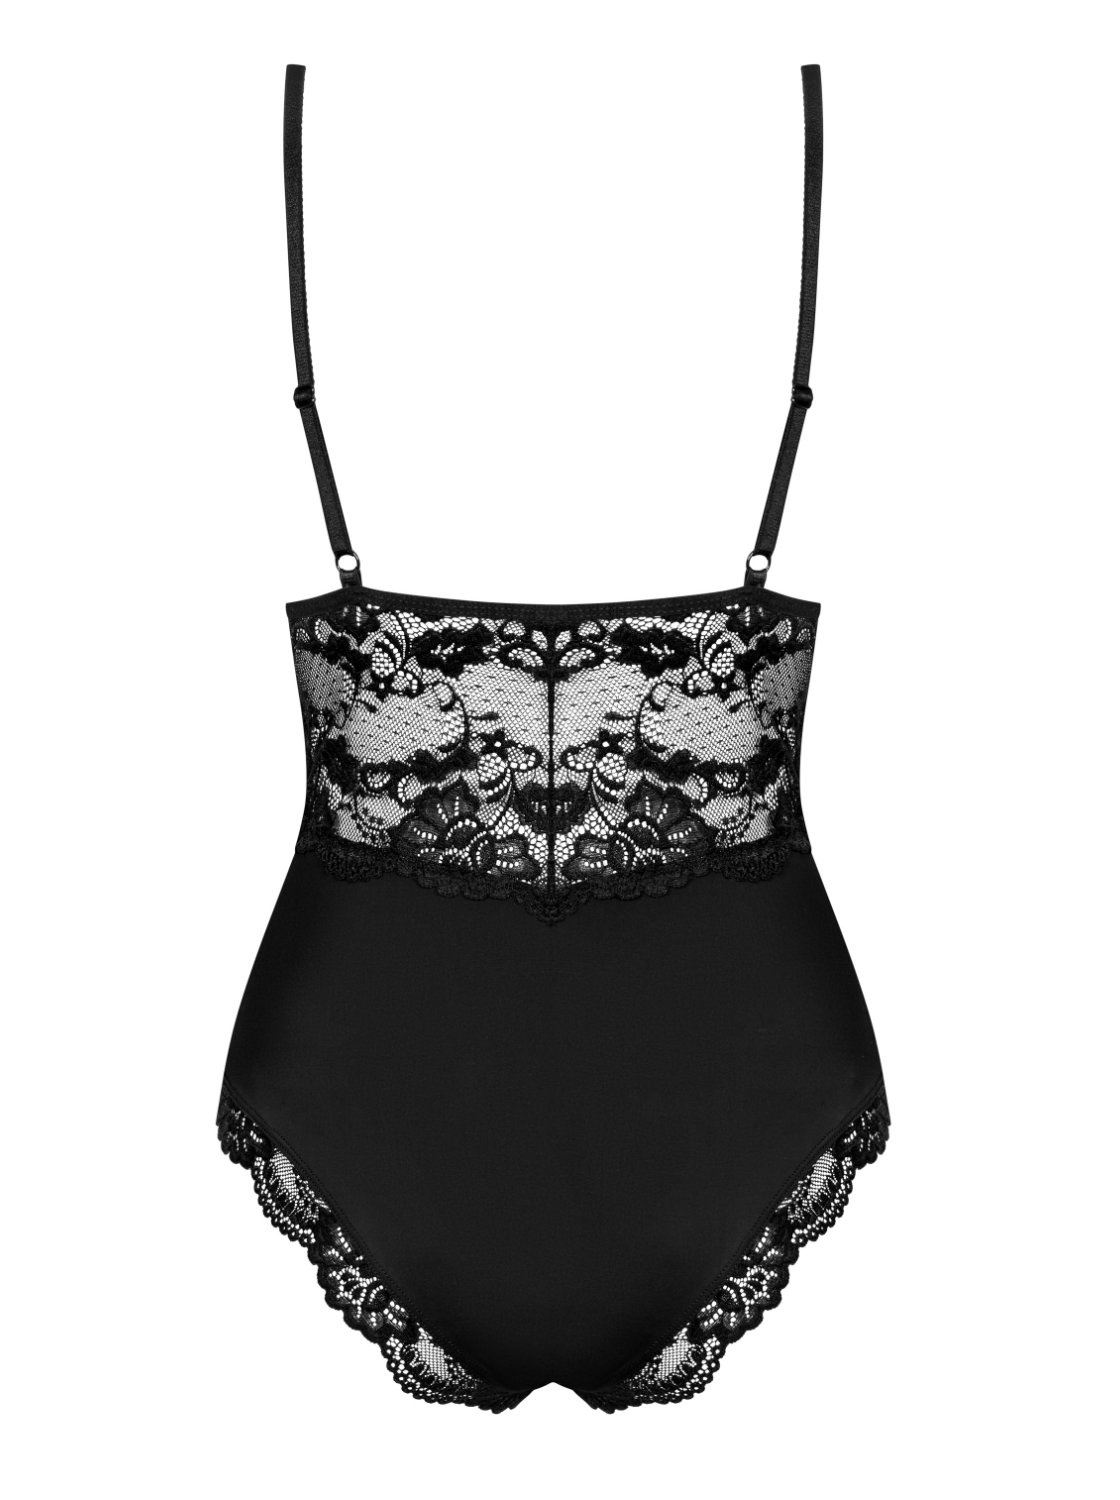 Black, lace teddy Obsessive Bodysuits